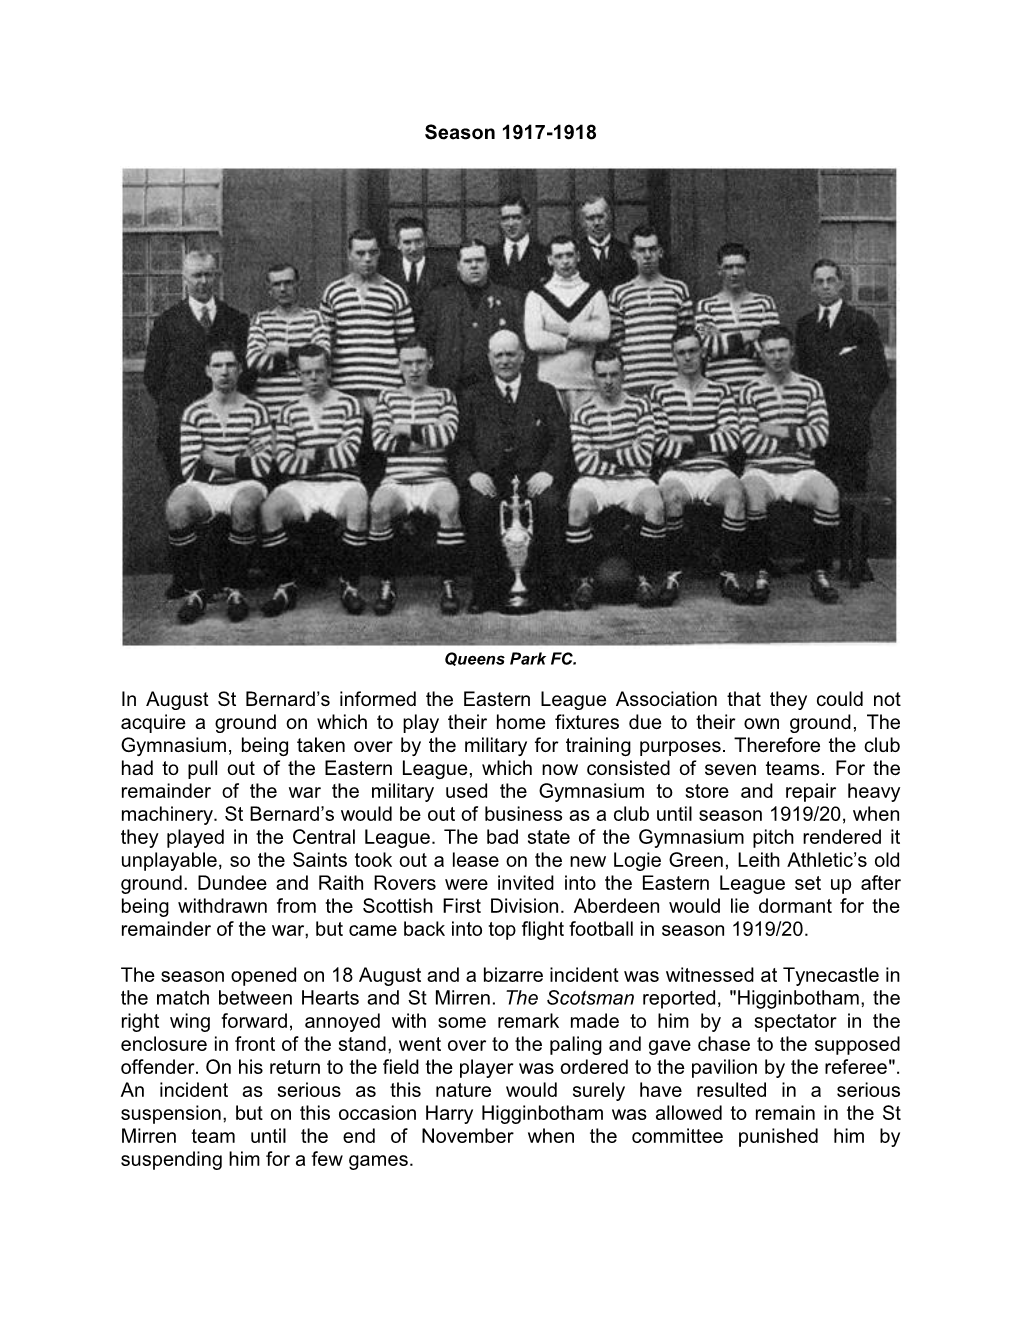 Season 1917/18, and Petershill Were Awarded the Trophy